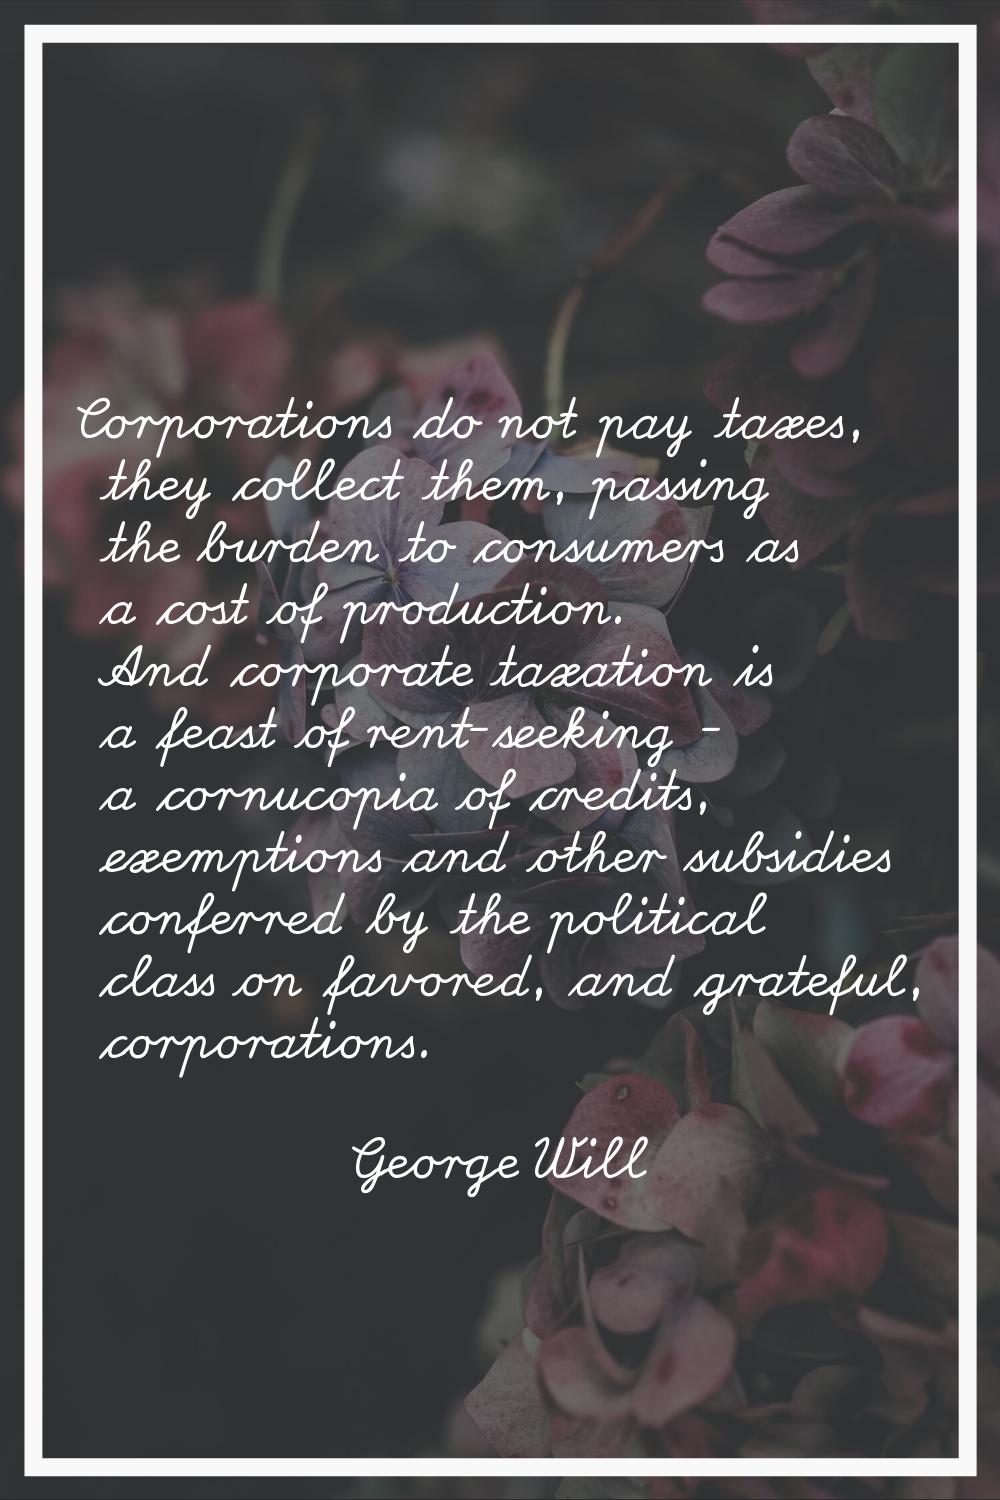 Corporations do not pay taxes, they collect them, passing the burden to consumers as a cost of prod